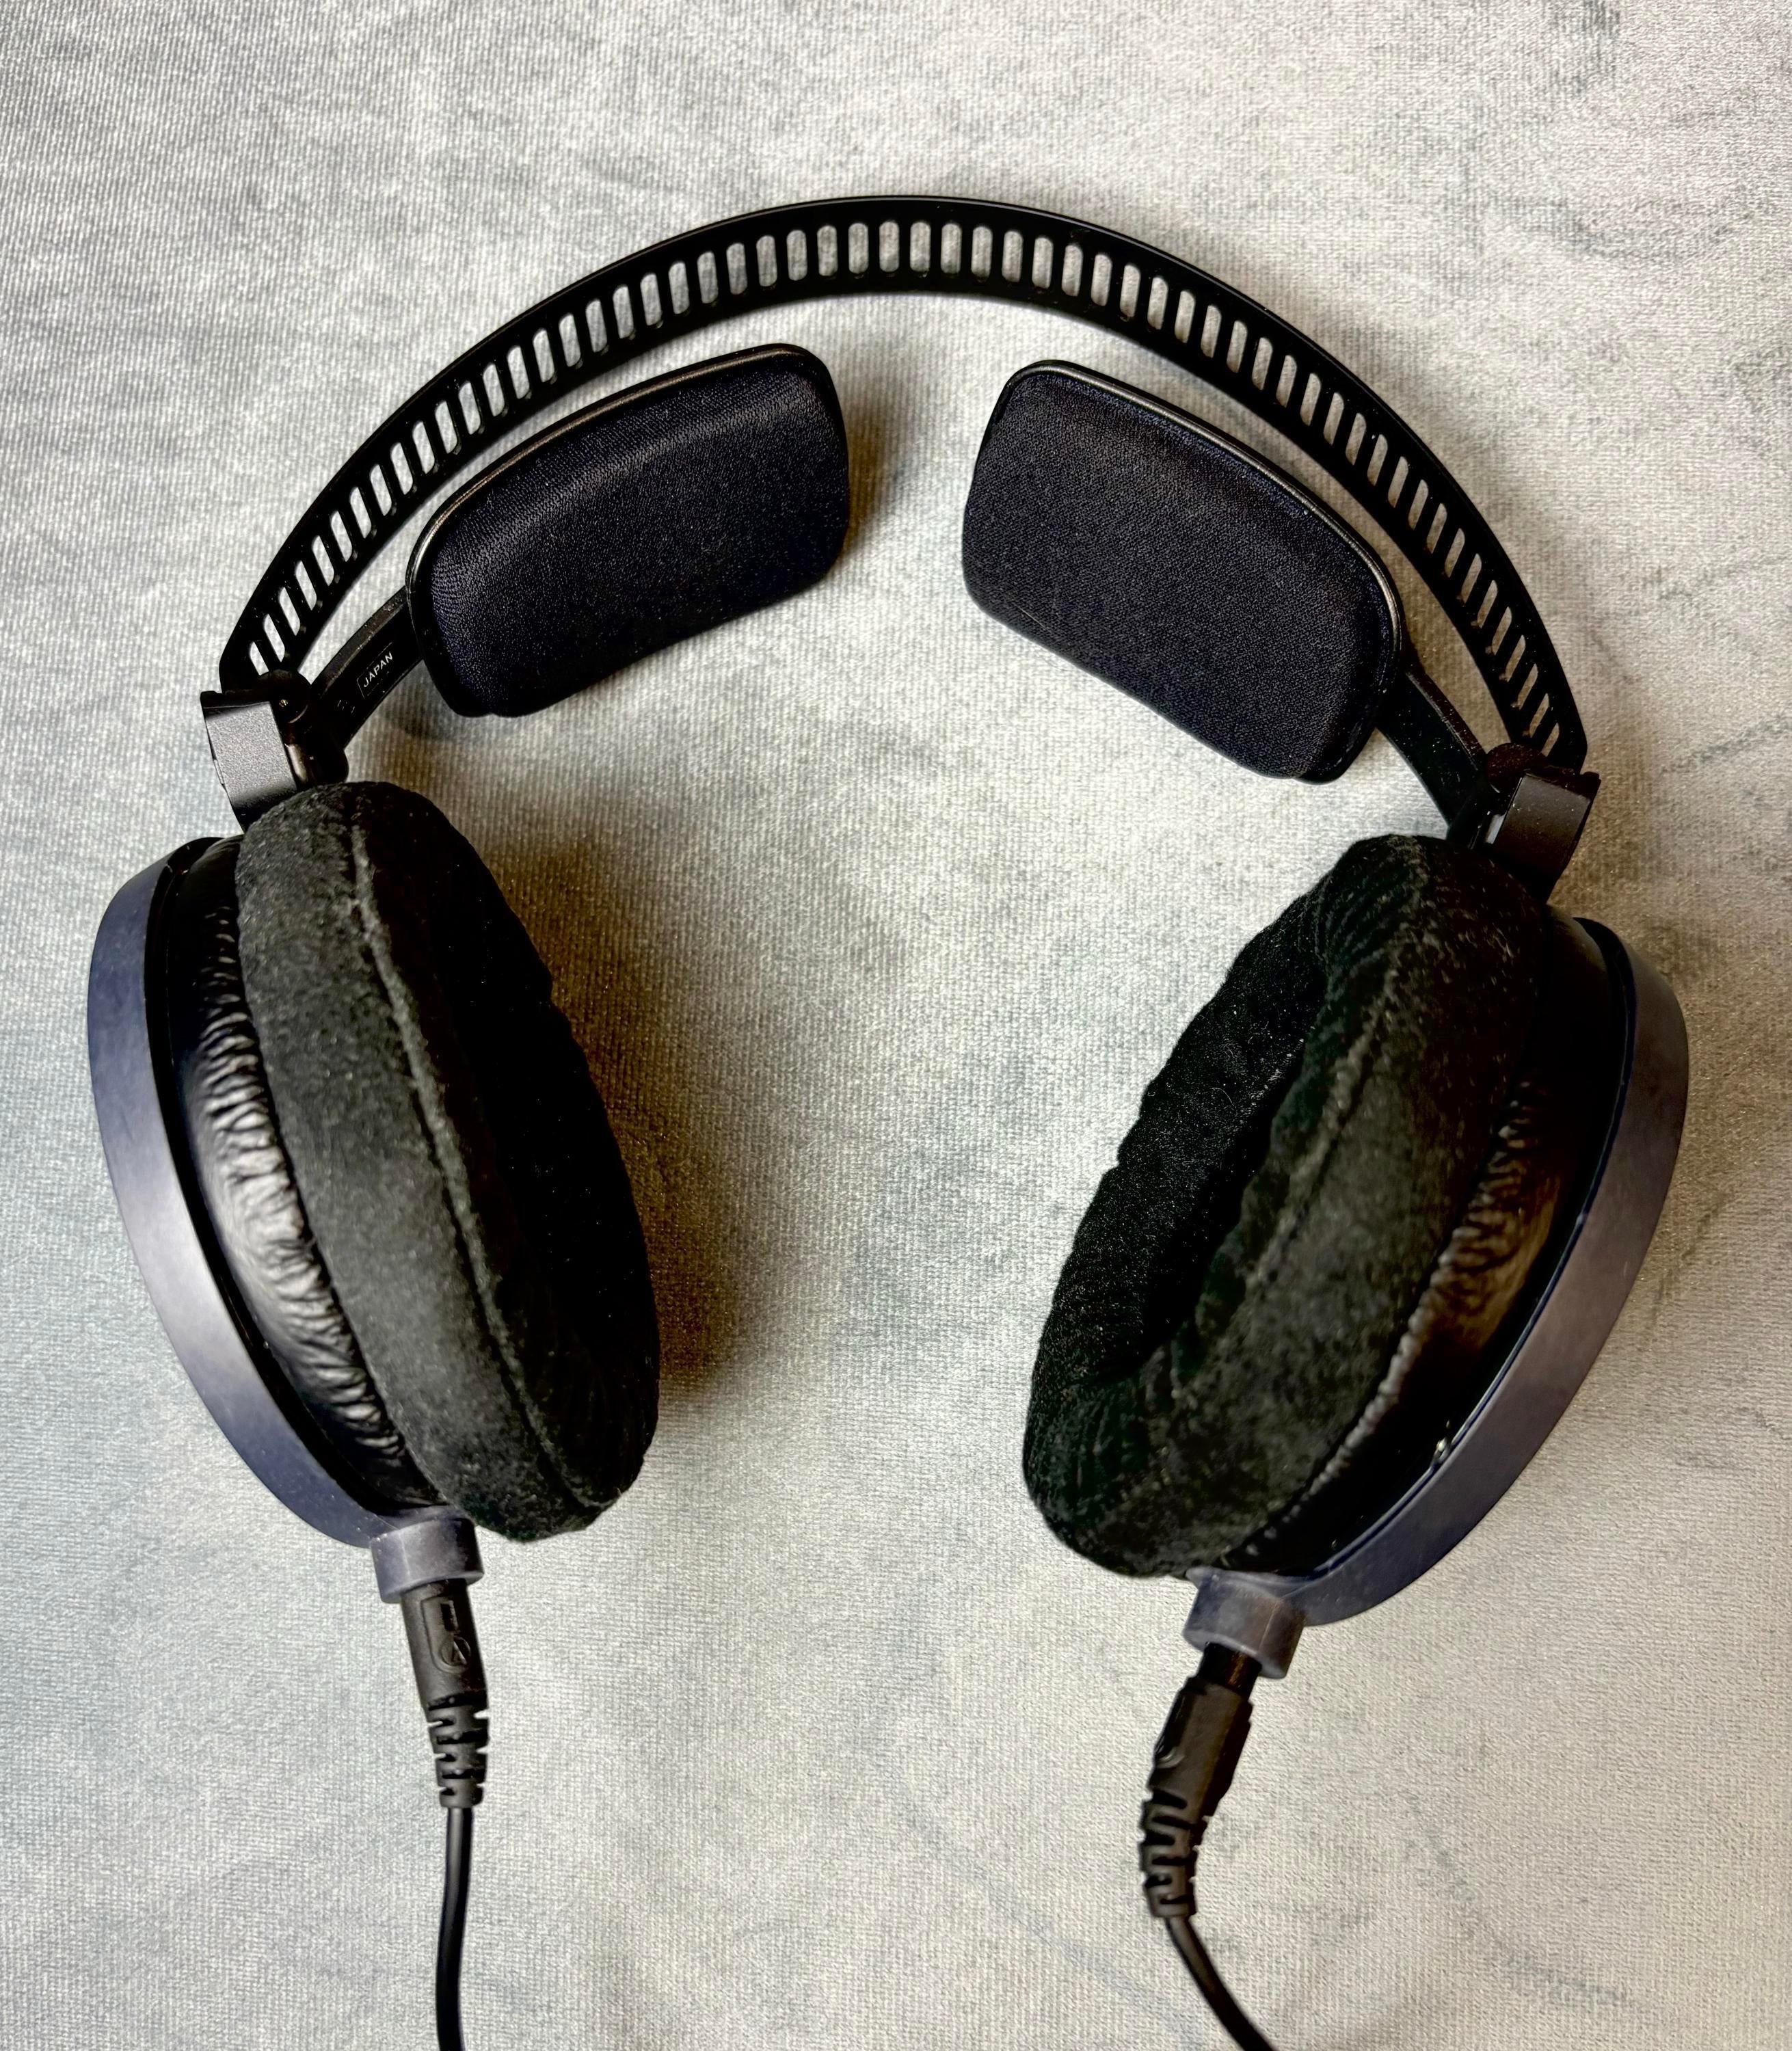 Used Audio-Technica ATH-R70x Open-back - Sweetwater's Gear Exchange